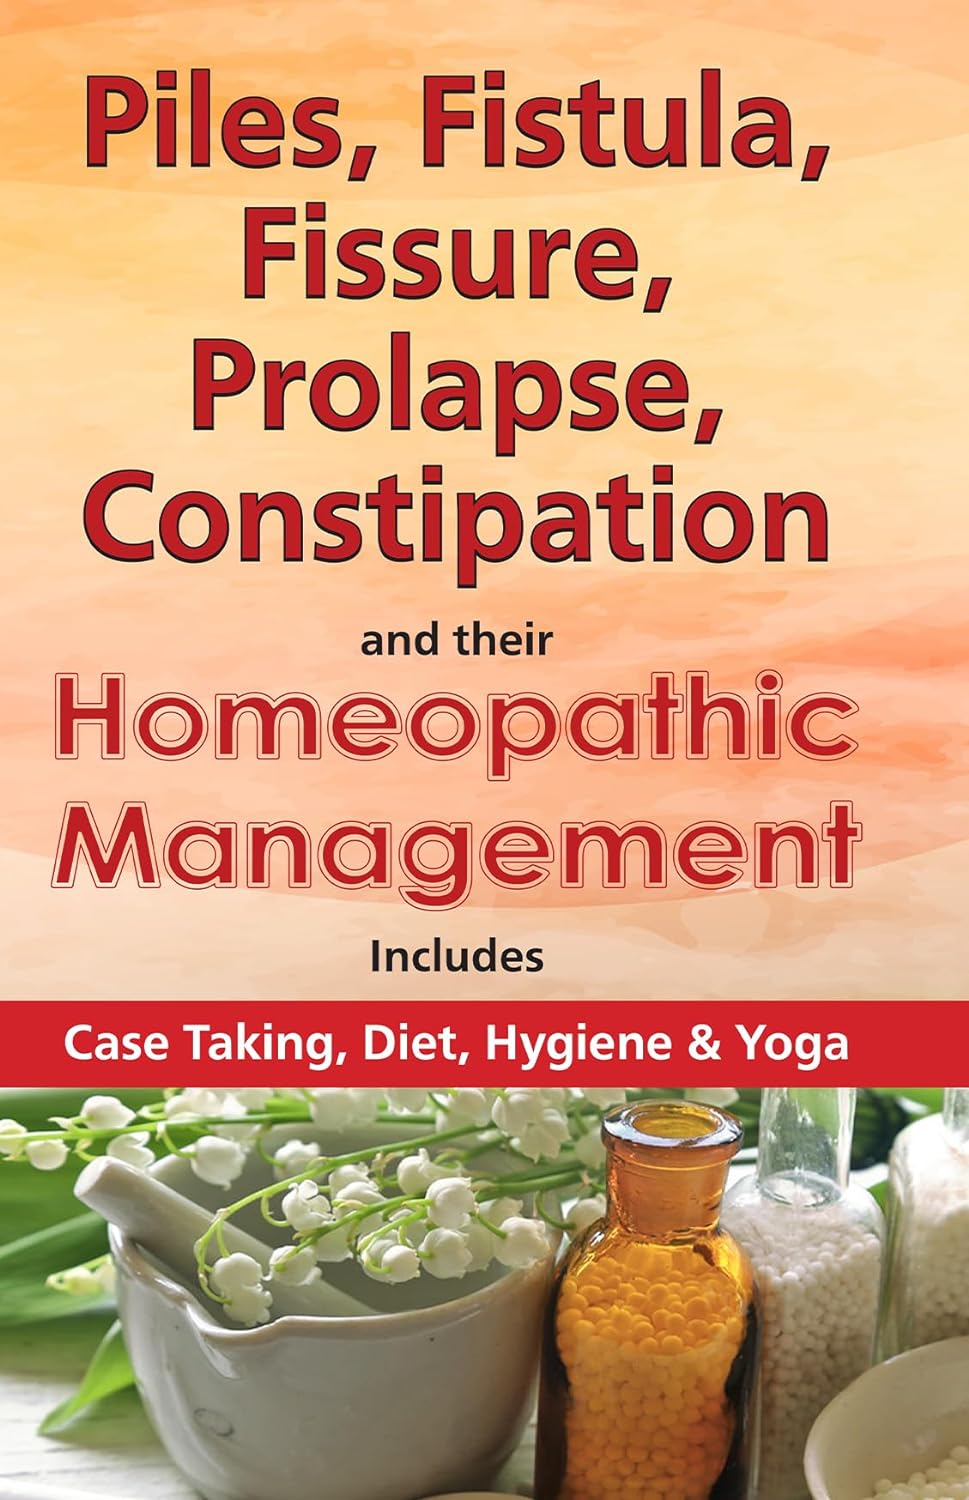 Piles, Fistula, Fissure, Prolapse, Constipation & their Homeopathic Management: Includes Case Taking, Diet, Hygiene & Yoga